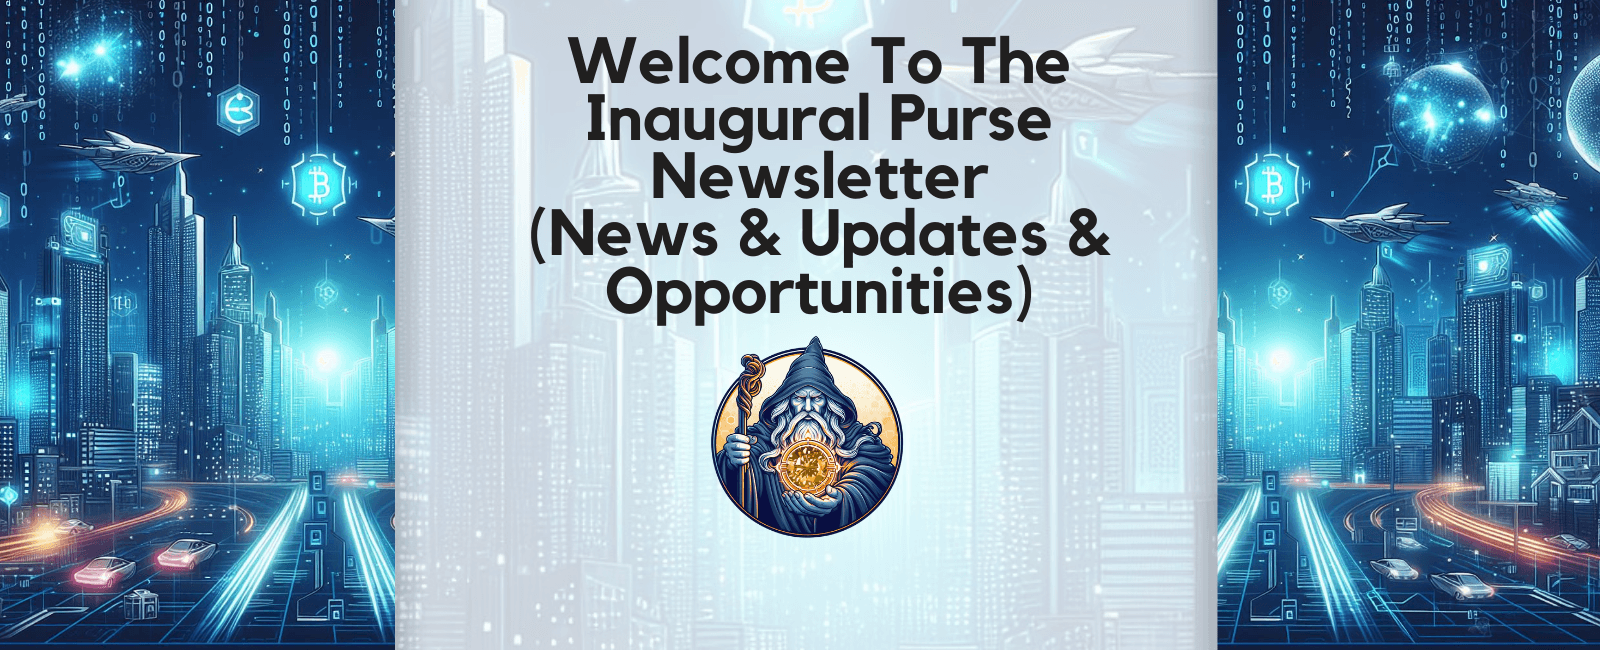 Welcome To The Inaugural Purse Newsletter (News & Updates & Opportunities)  